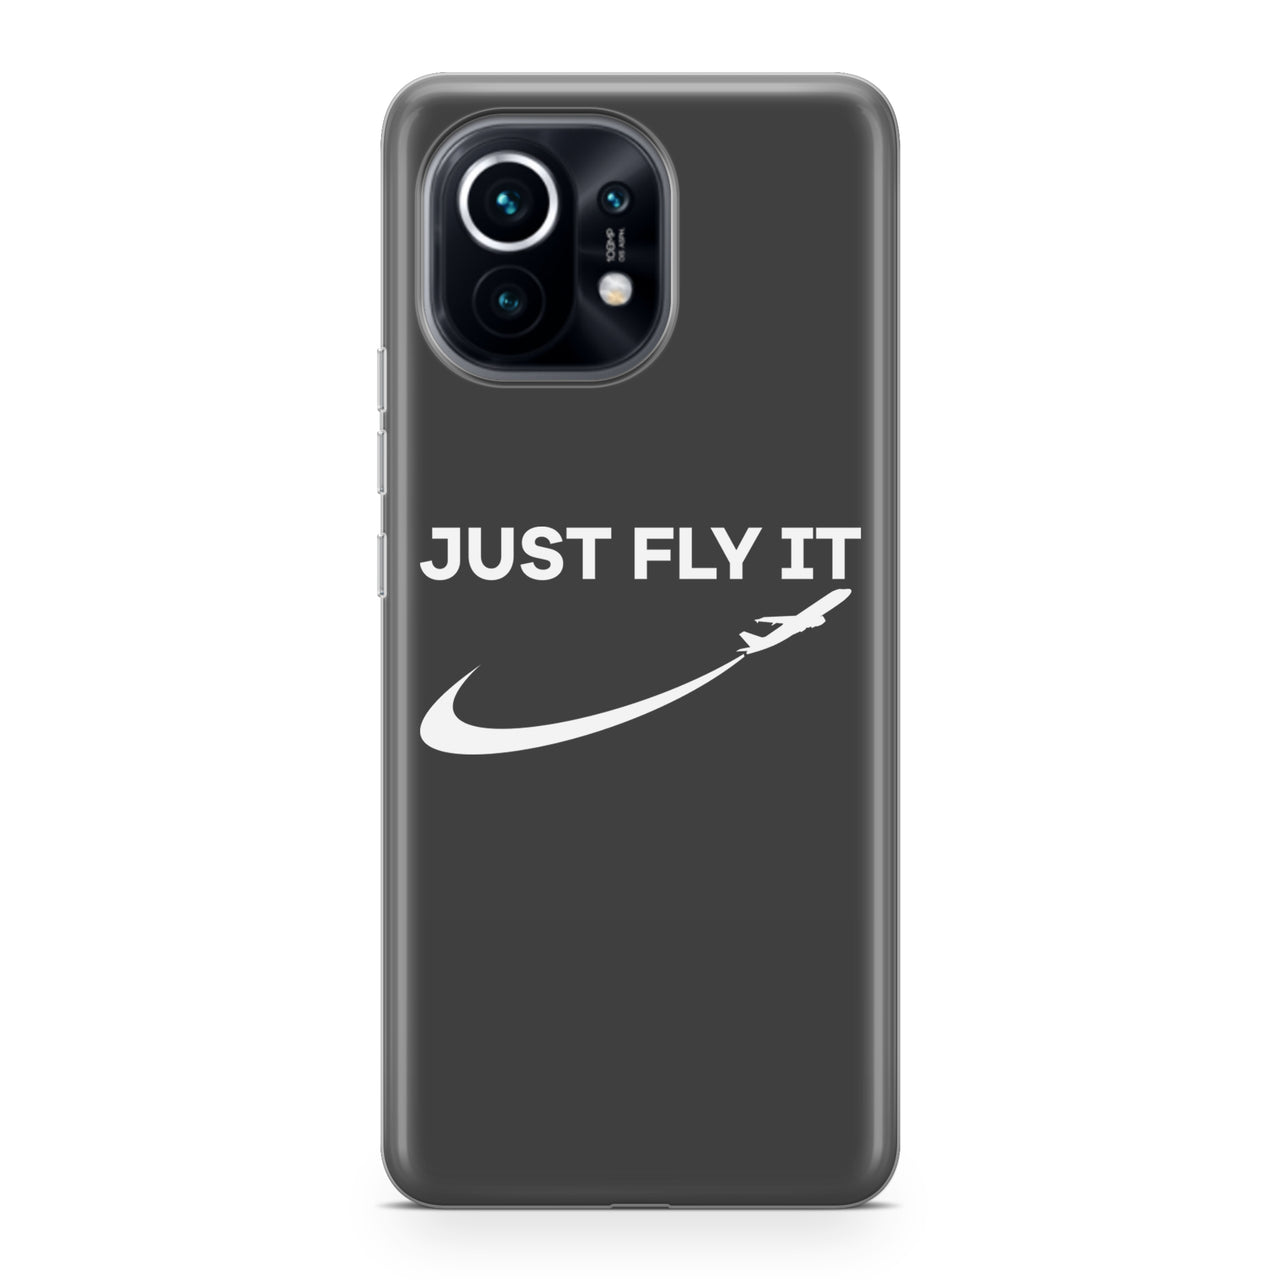 Just Fly It 2 Designed Xiaomi Cases